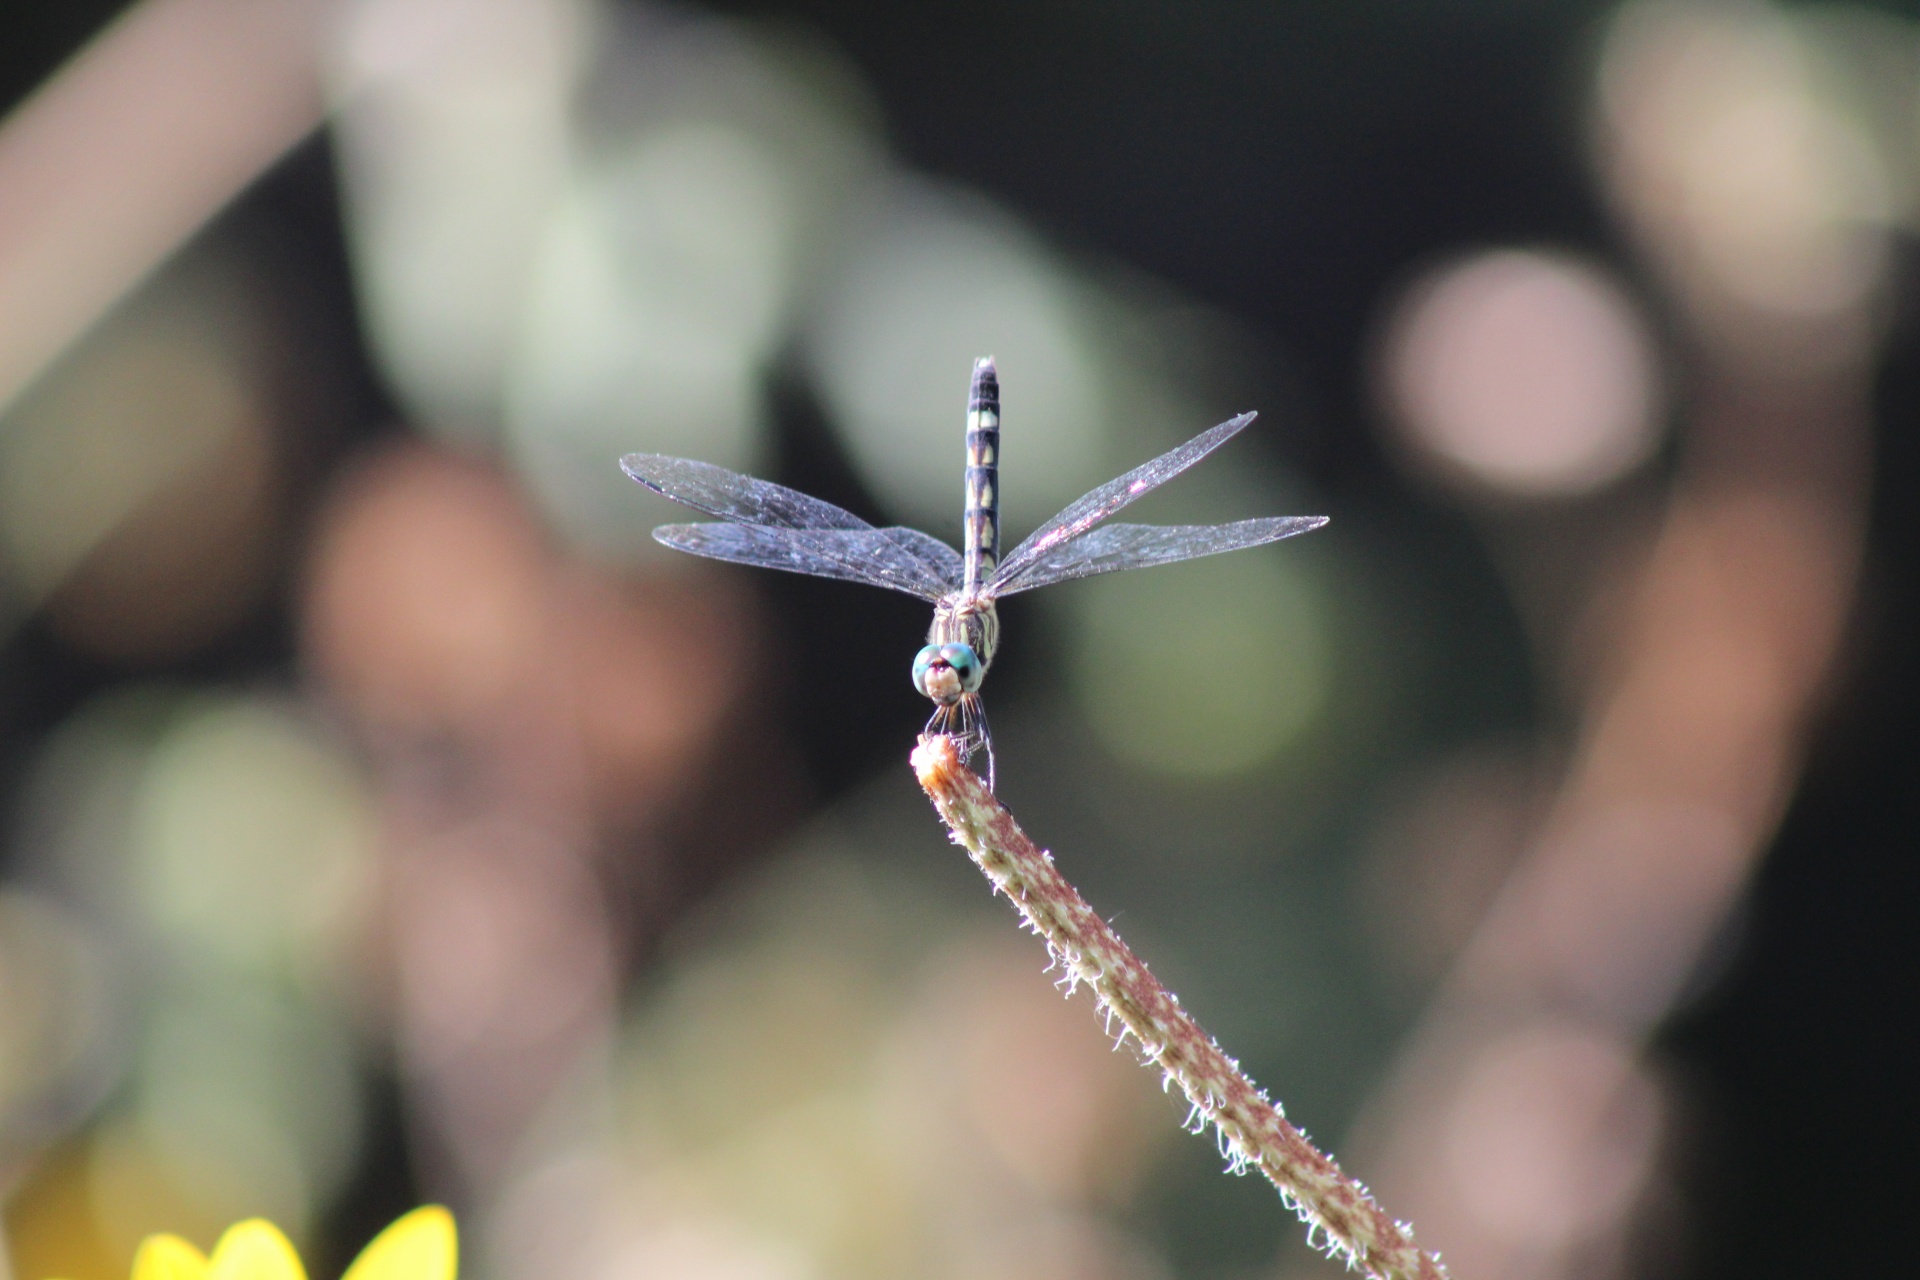 Isn't it wonderful how the dragonflies pose different angles, and stay posed long enough to take some good shots with the telescopic lens